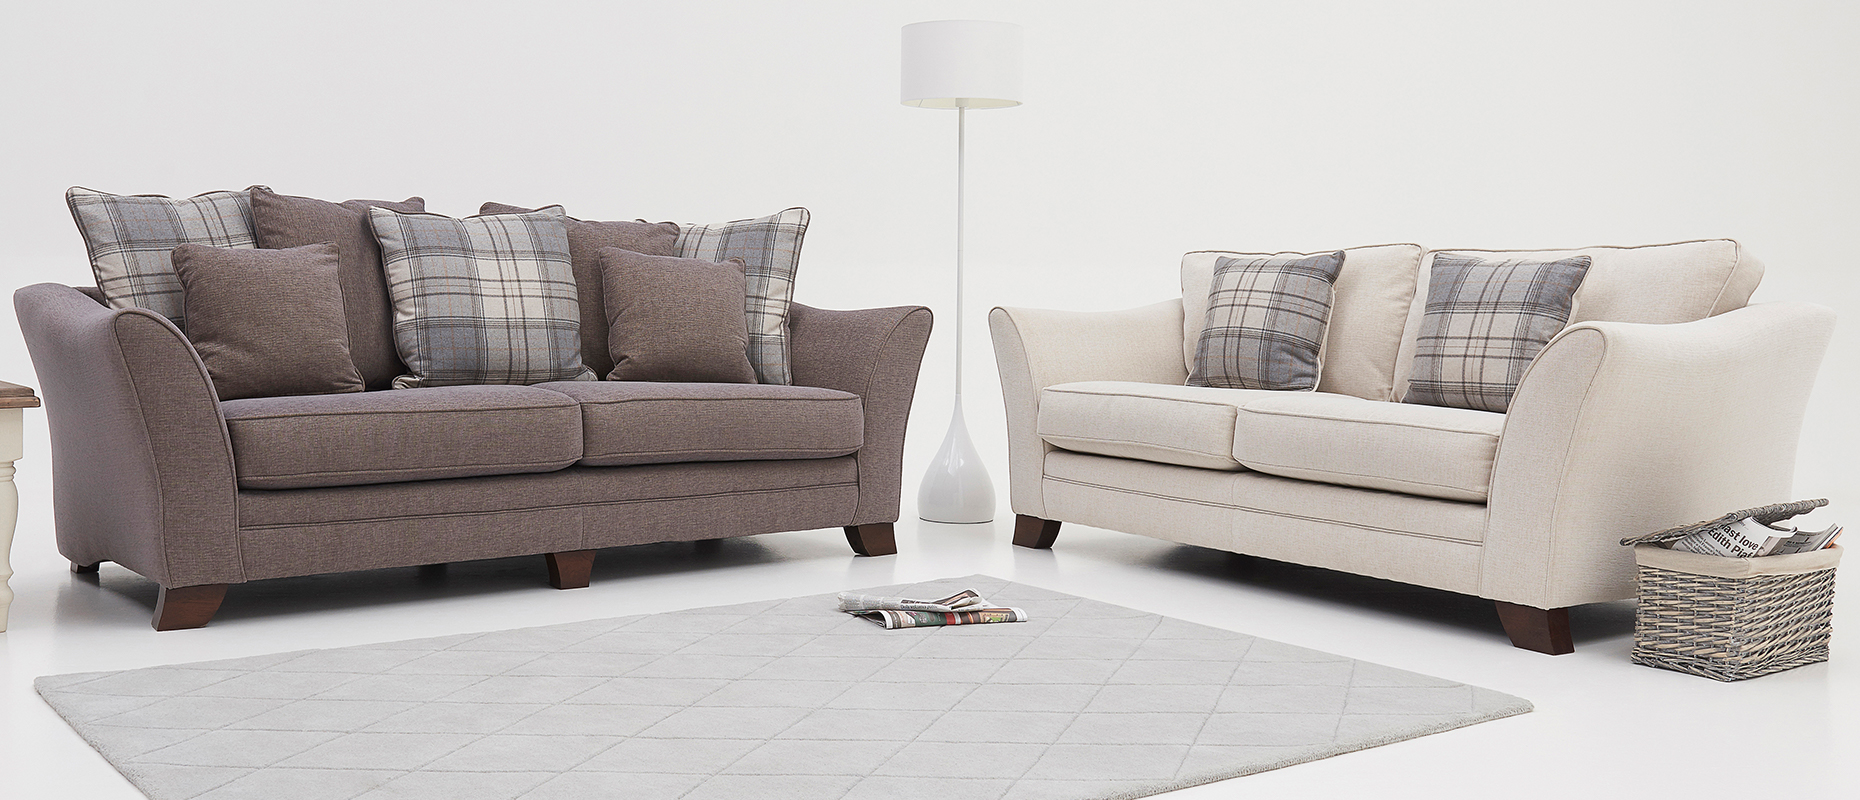 Fontwell sofa Collection at Forrest Furnishing